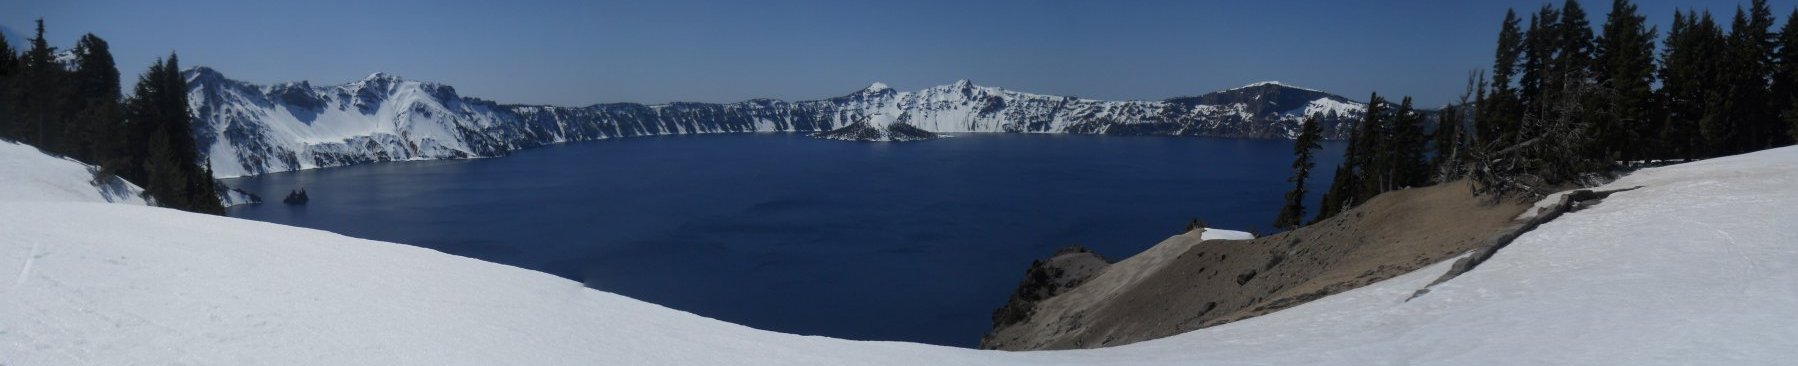 Crater Lake Overlook